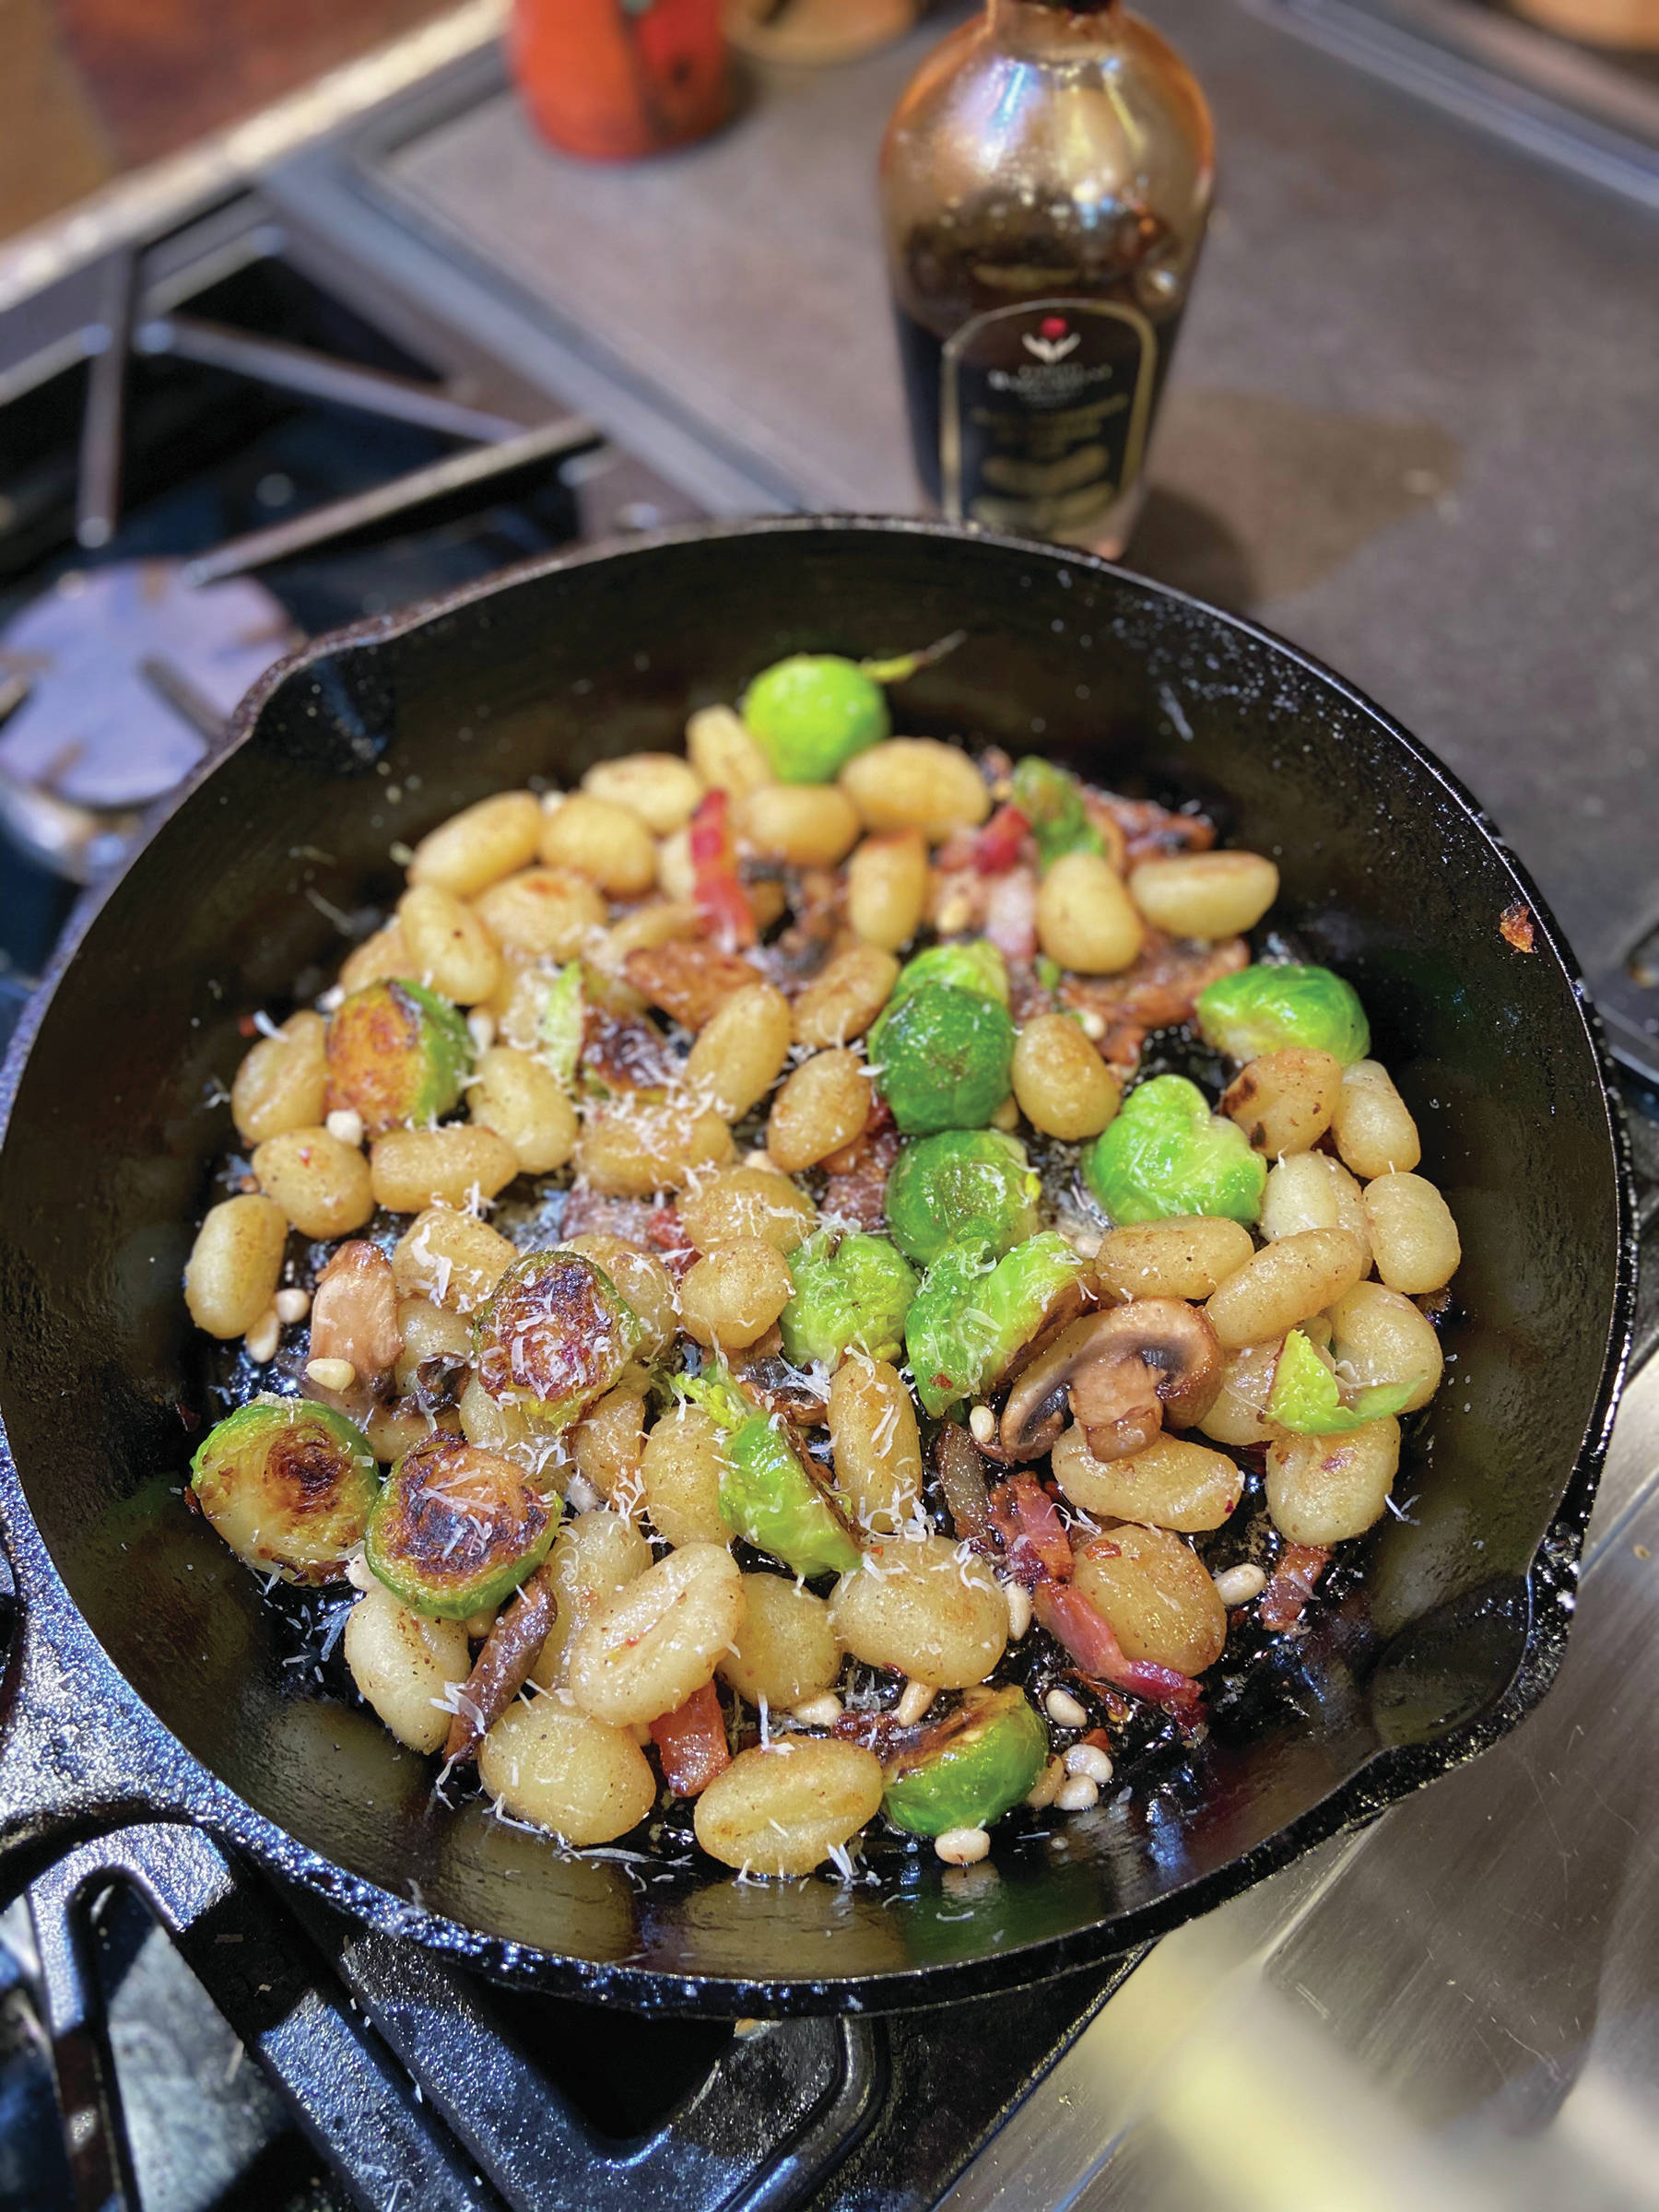 This recipe of gnochi and brussels sprouts in brown butter might be just the thing to warm you up on a cold winter day, as seen here on Feb. 17, 2020, in Teri Robl’s kitchen in Homer, Alaska. (Photo by Teri Robl)